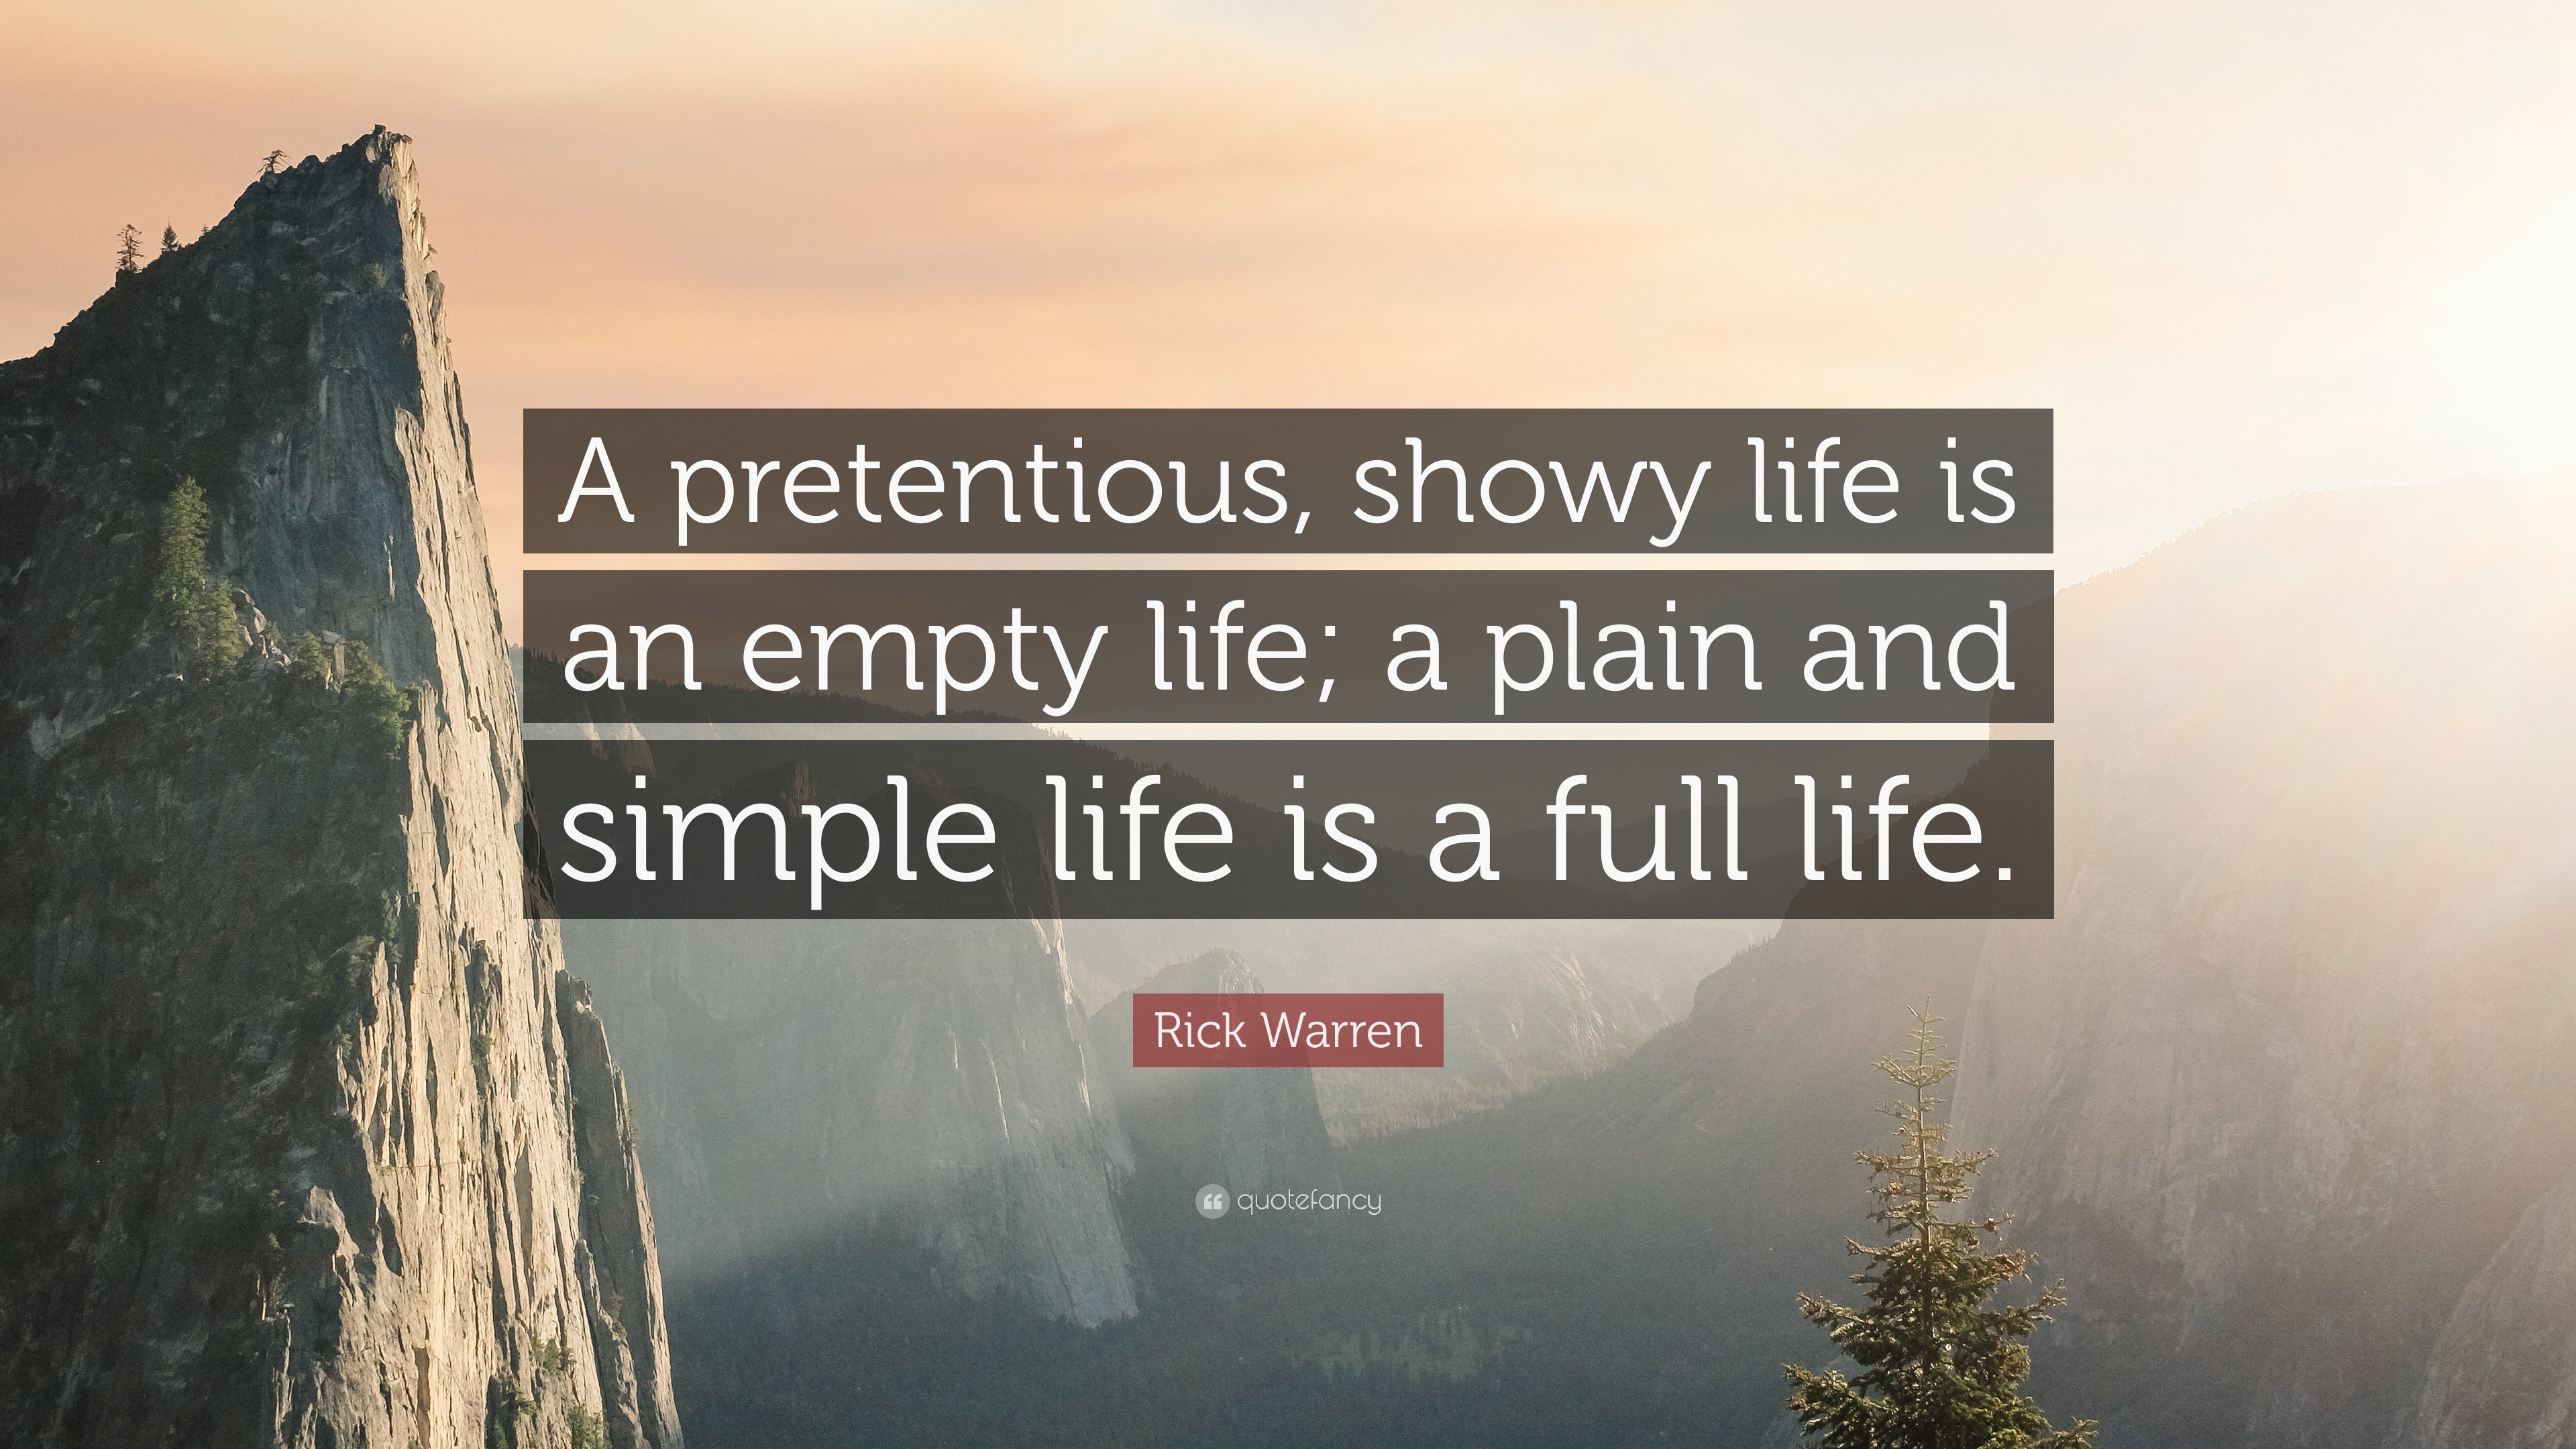 Rick Warren Quote A Pretentious Showy Life Is An Empty Life A Plain And Simple Life